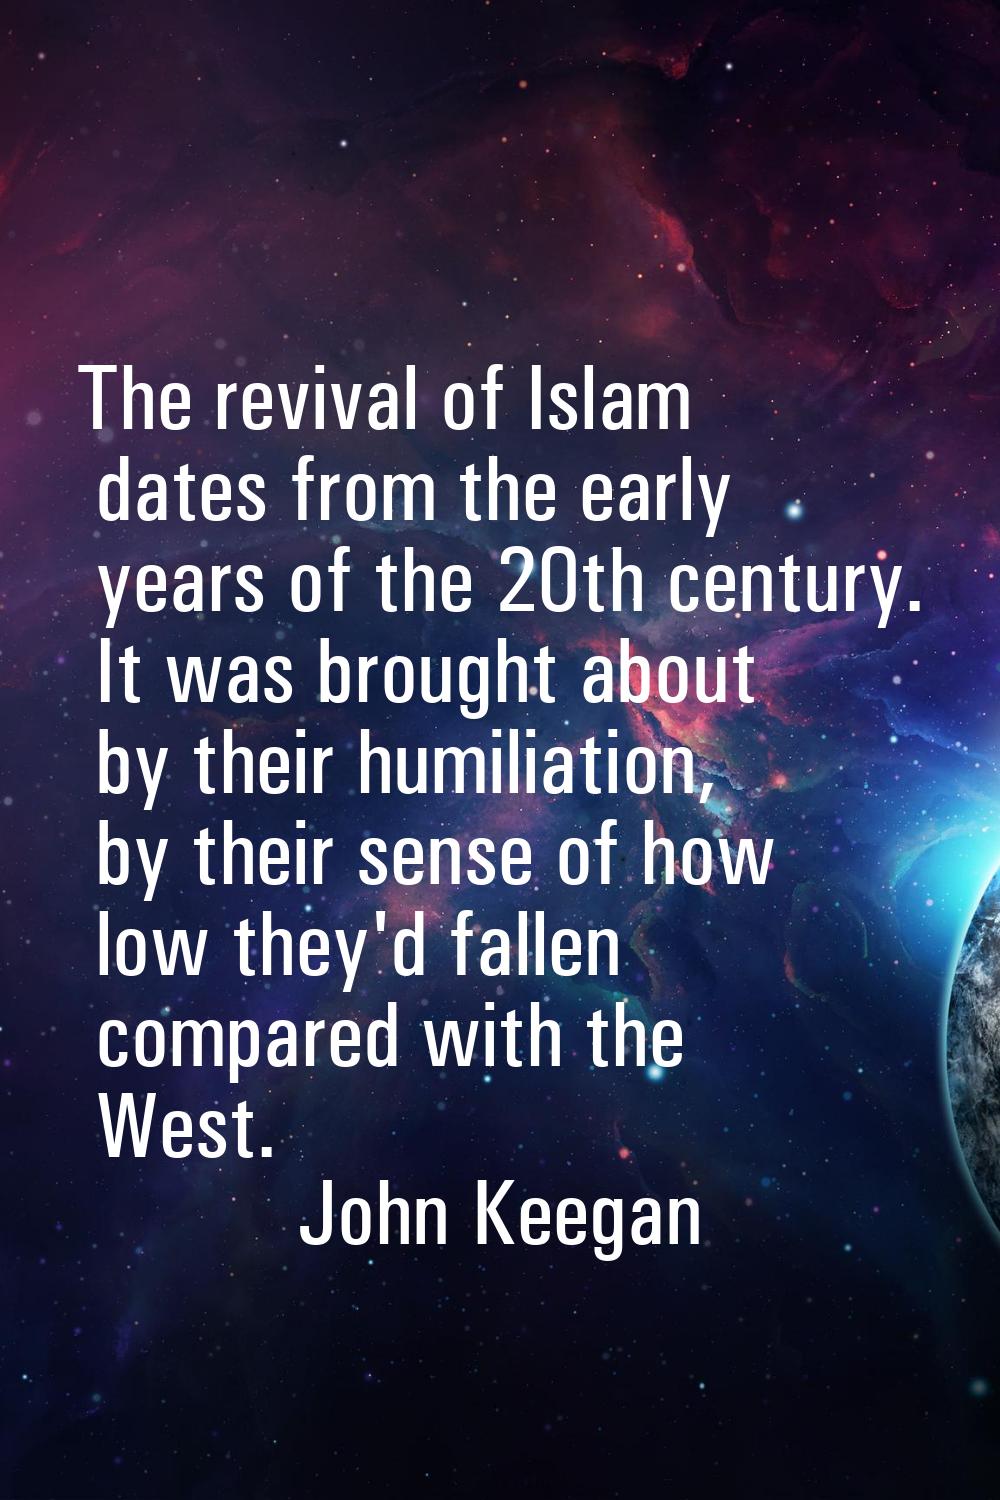 The revival of Islam dates from the early years of the 20th century. It was brought about by their 